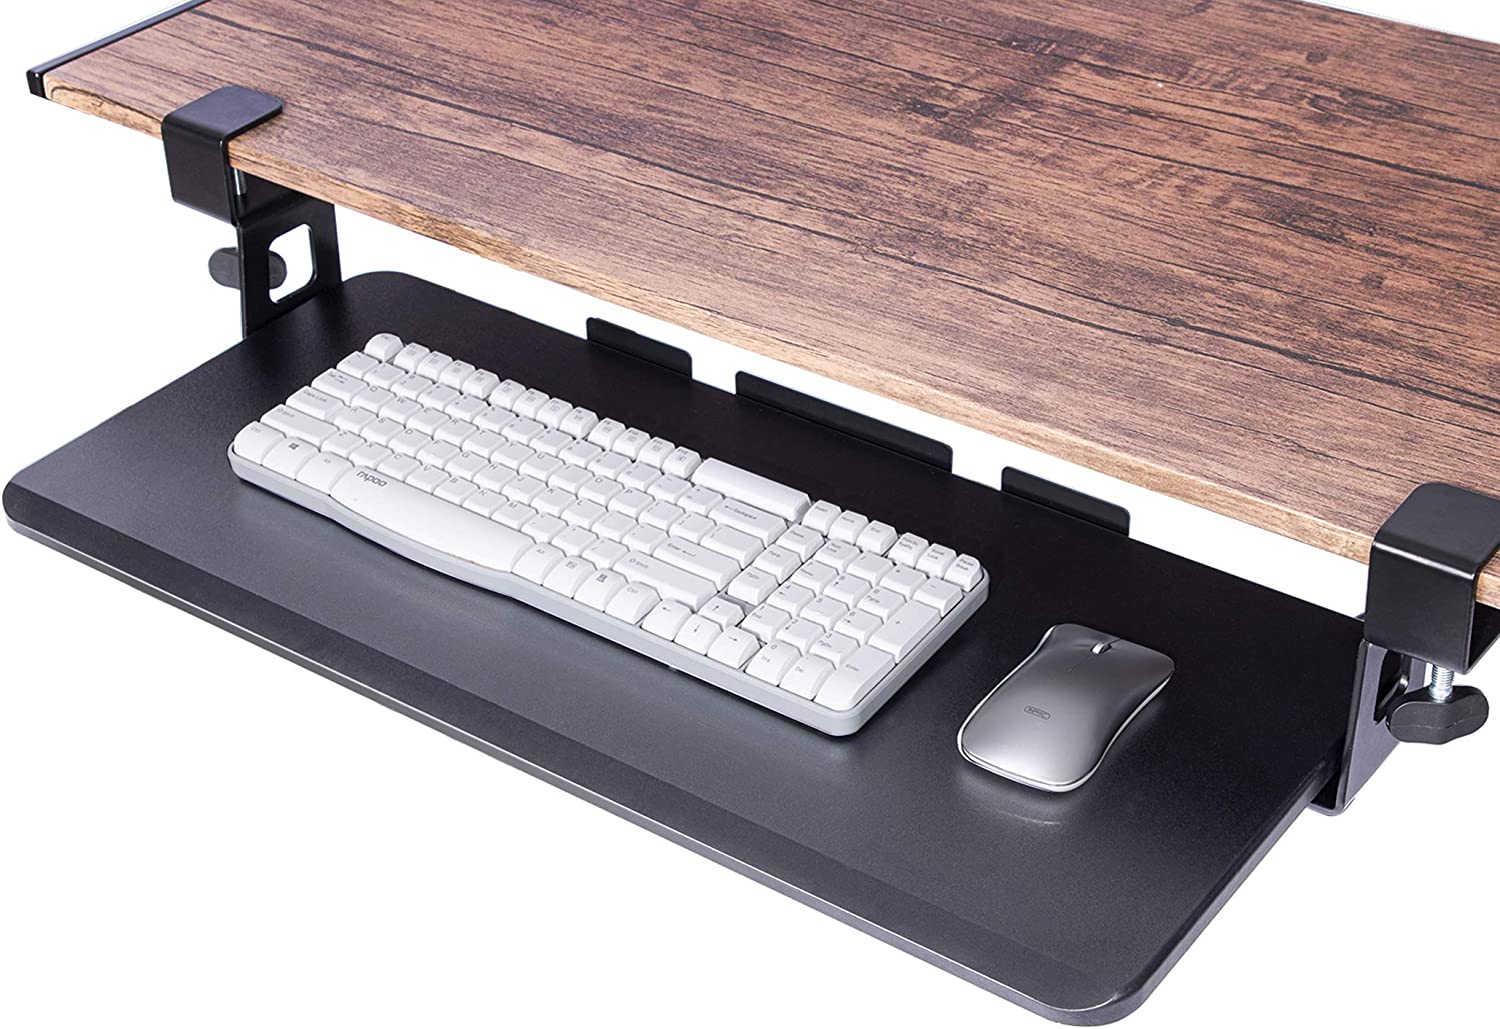 HUANUO Metal Keyboard Tray, Ergonomic Clamp Mount Under Desk Mount Slide Tray with Slide-Out Platform Computer Drawer for Typing and Mouse Work